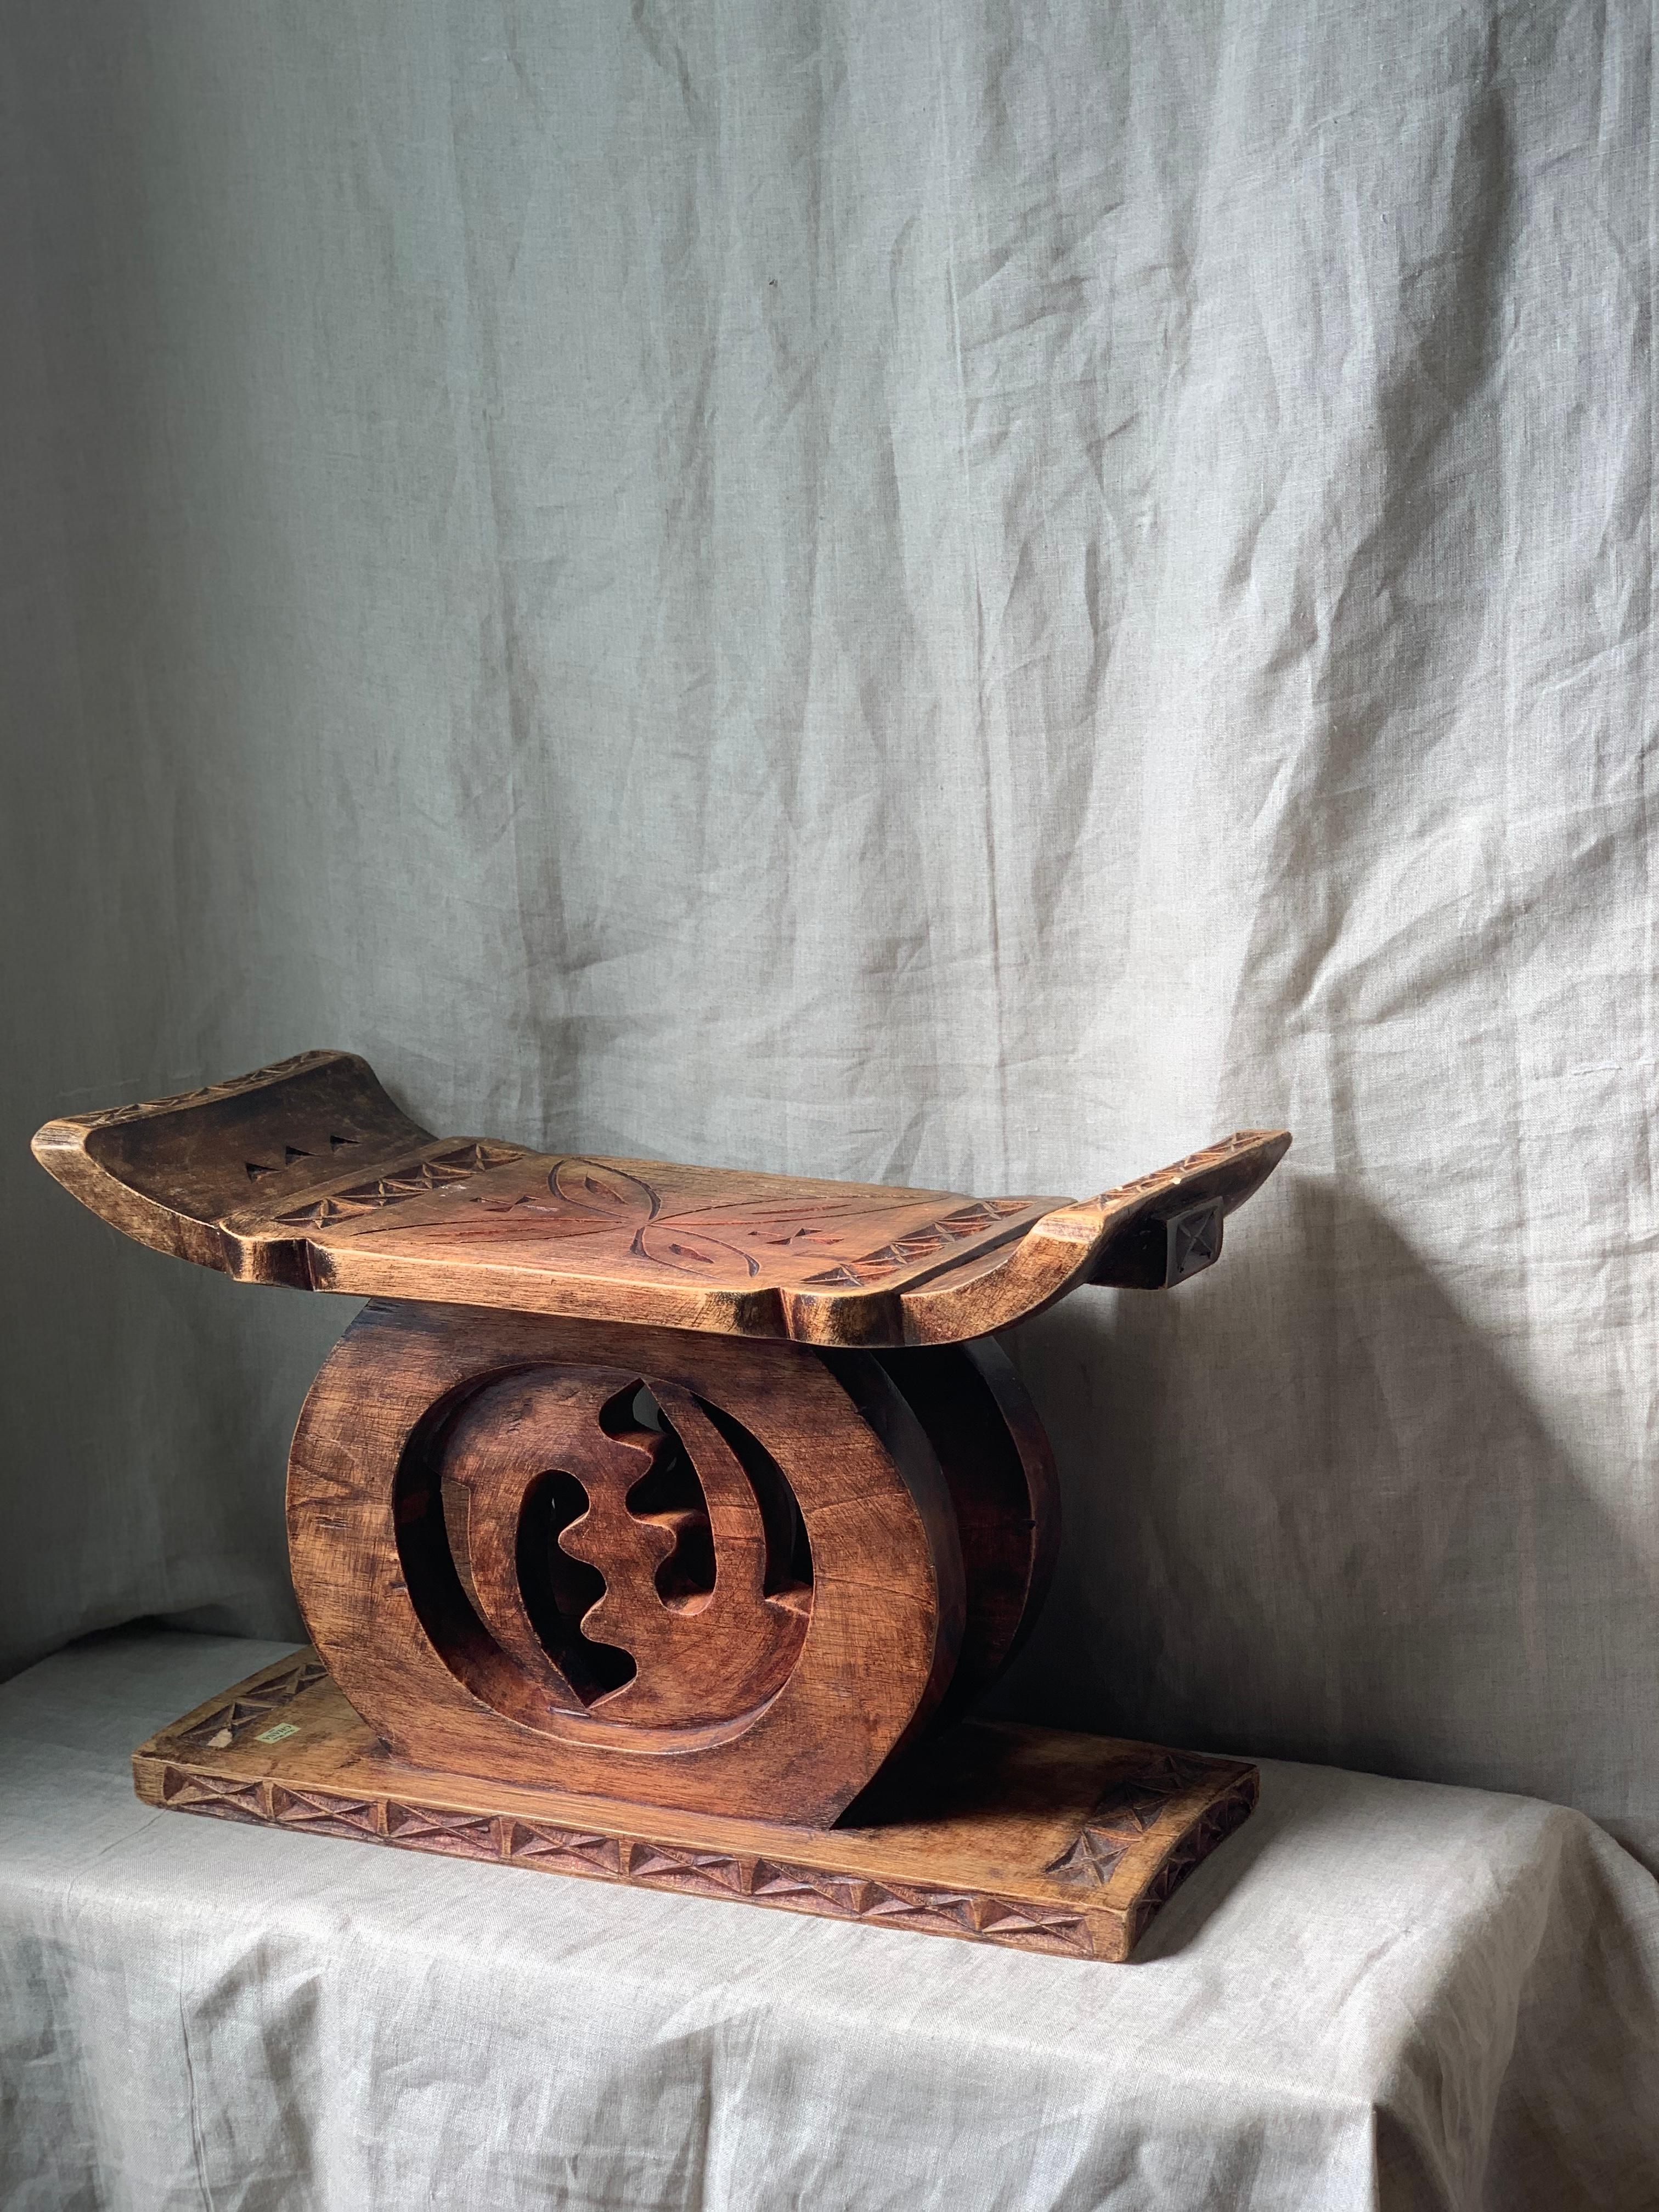 Hand carved teak African (Ghana) Ashanti stool. 

Carved at the center is the Adinkra 